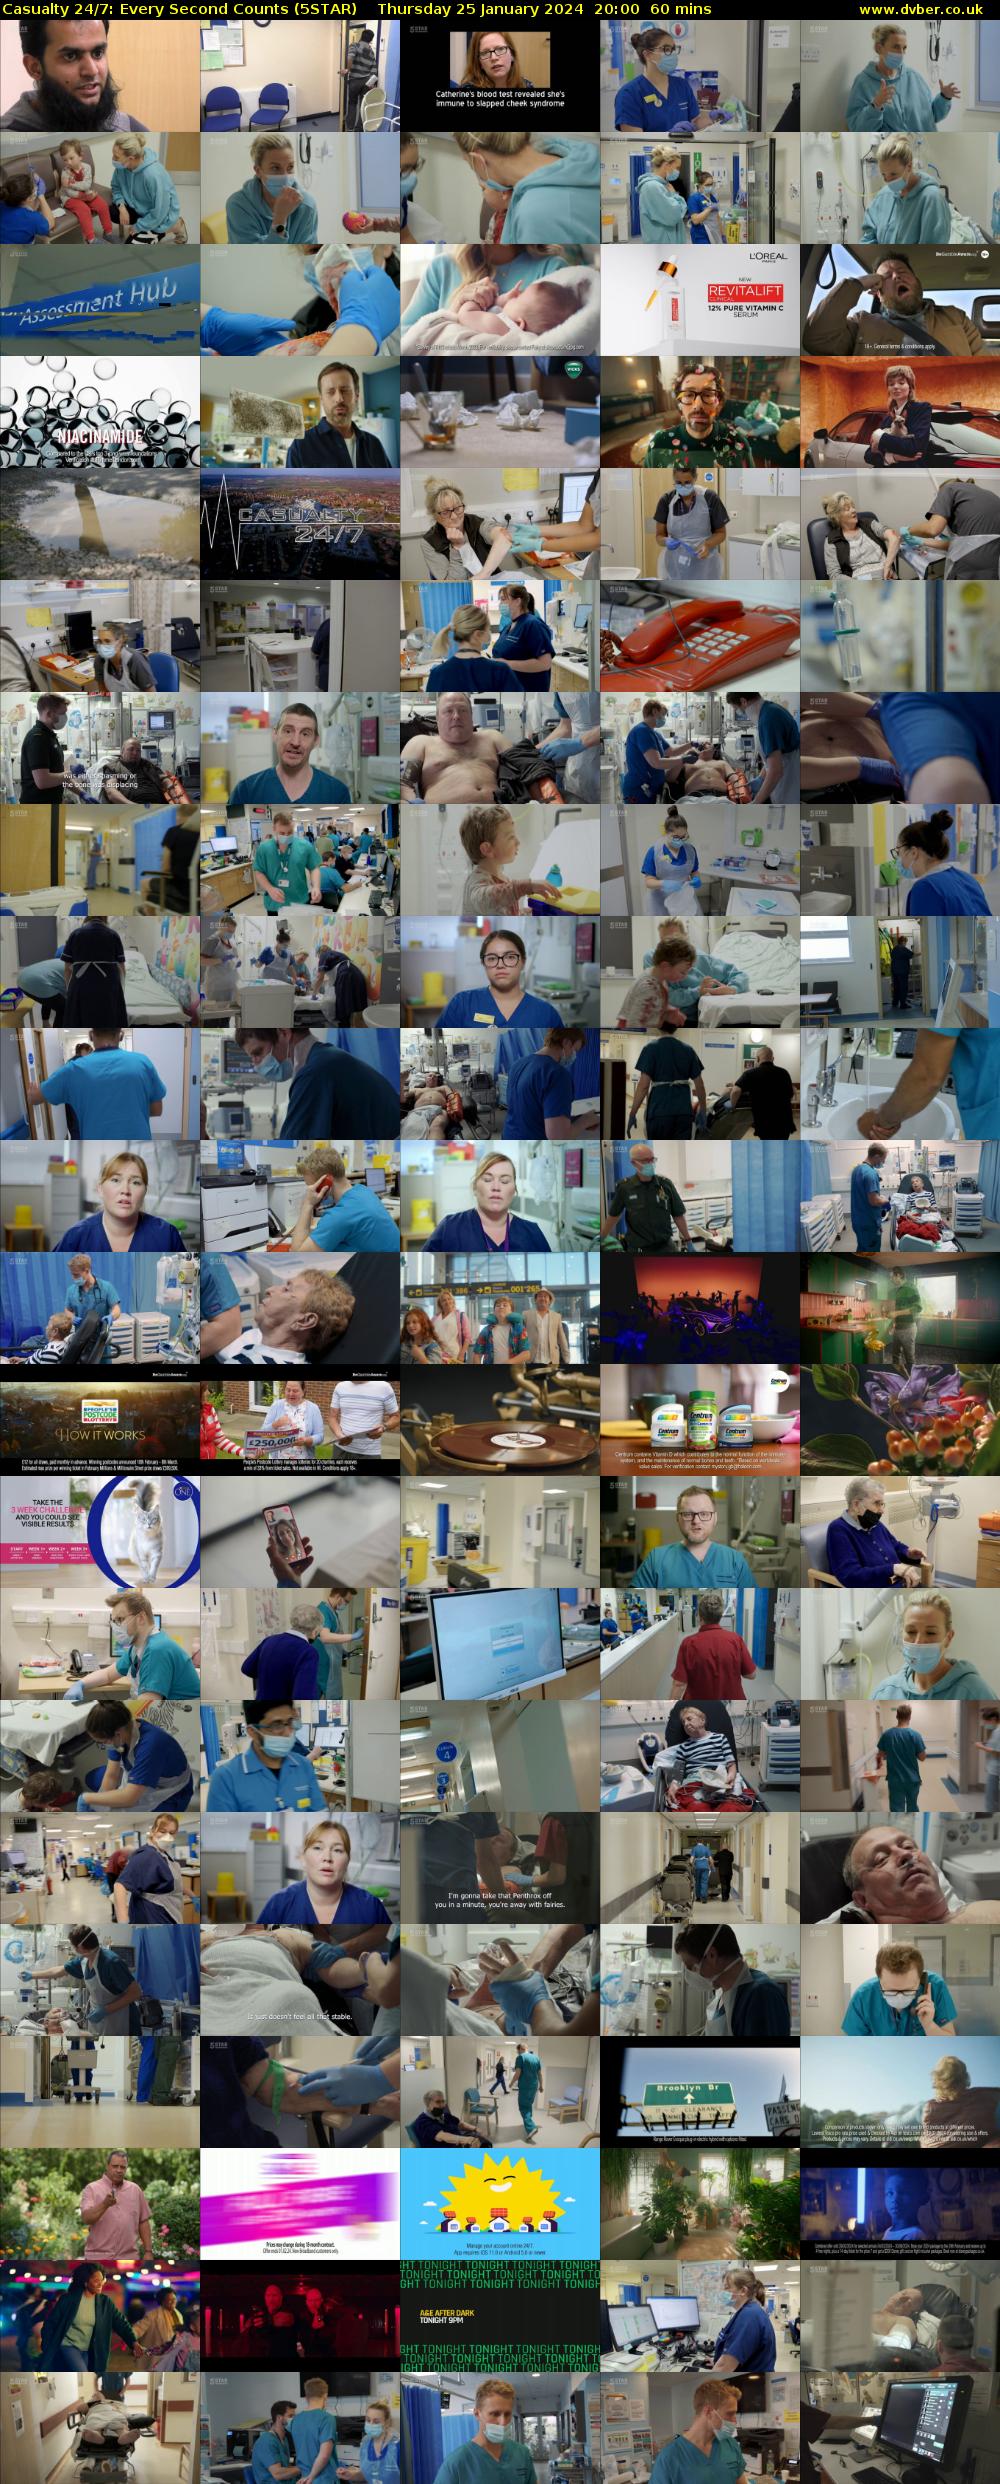 Casualty 24/7: Every Second Counts (5STAR) Thursday 25 January 2024 20:00 - 21:00